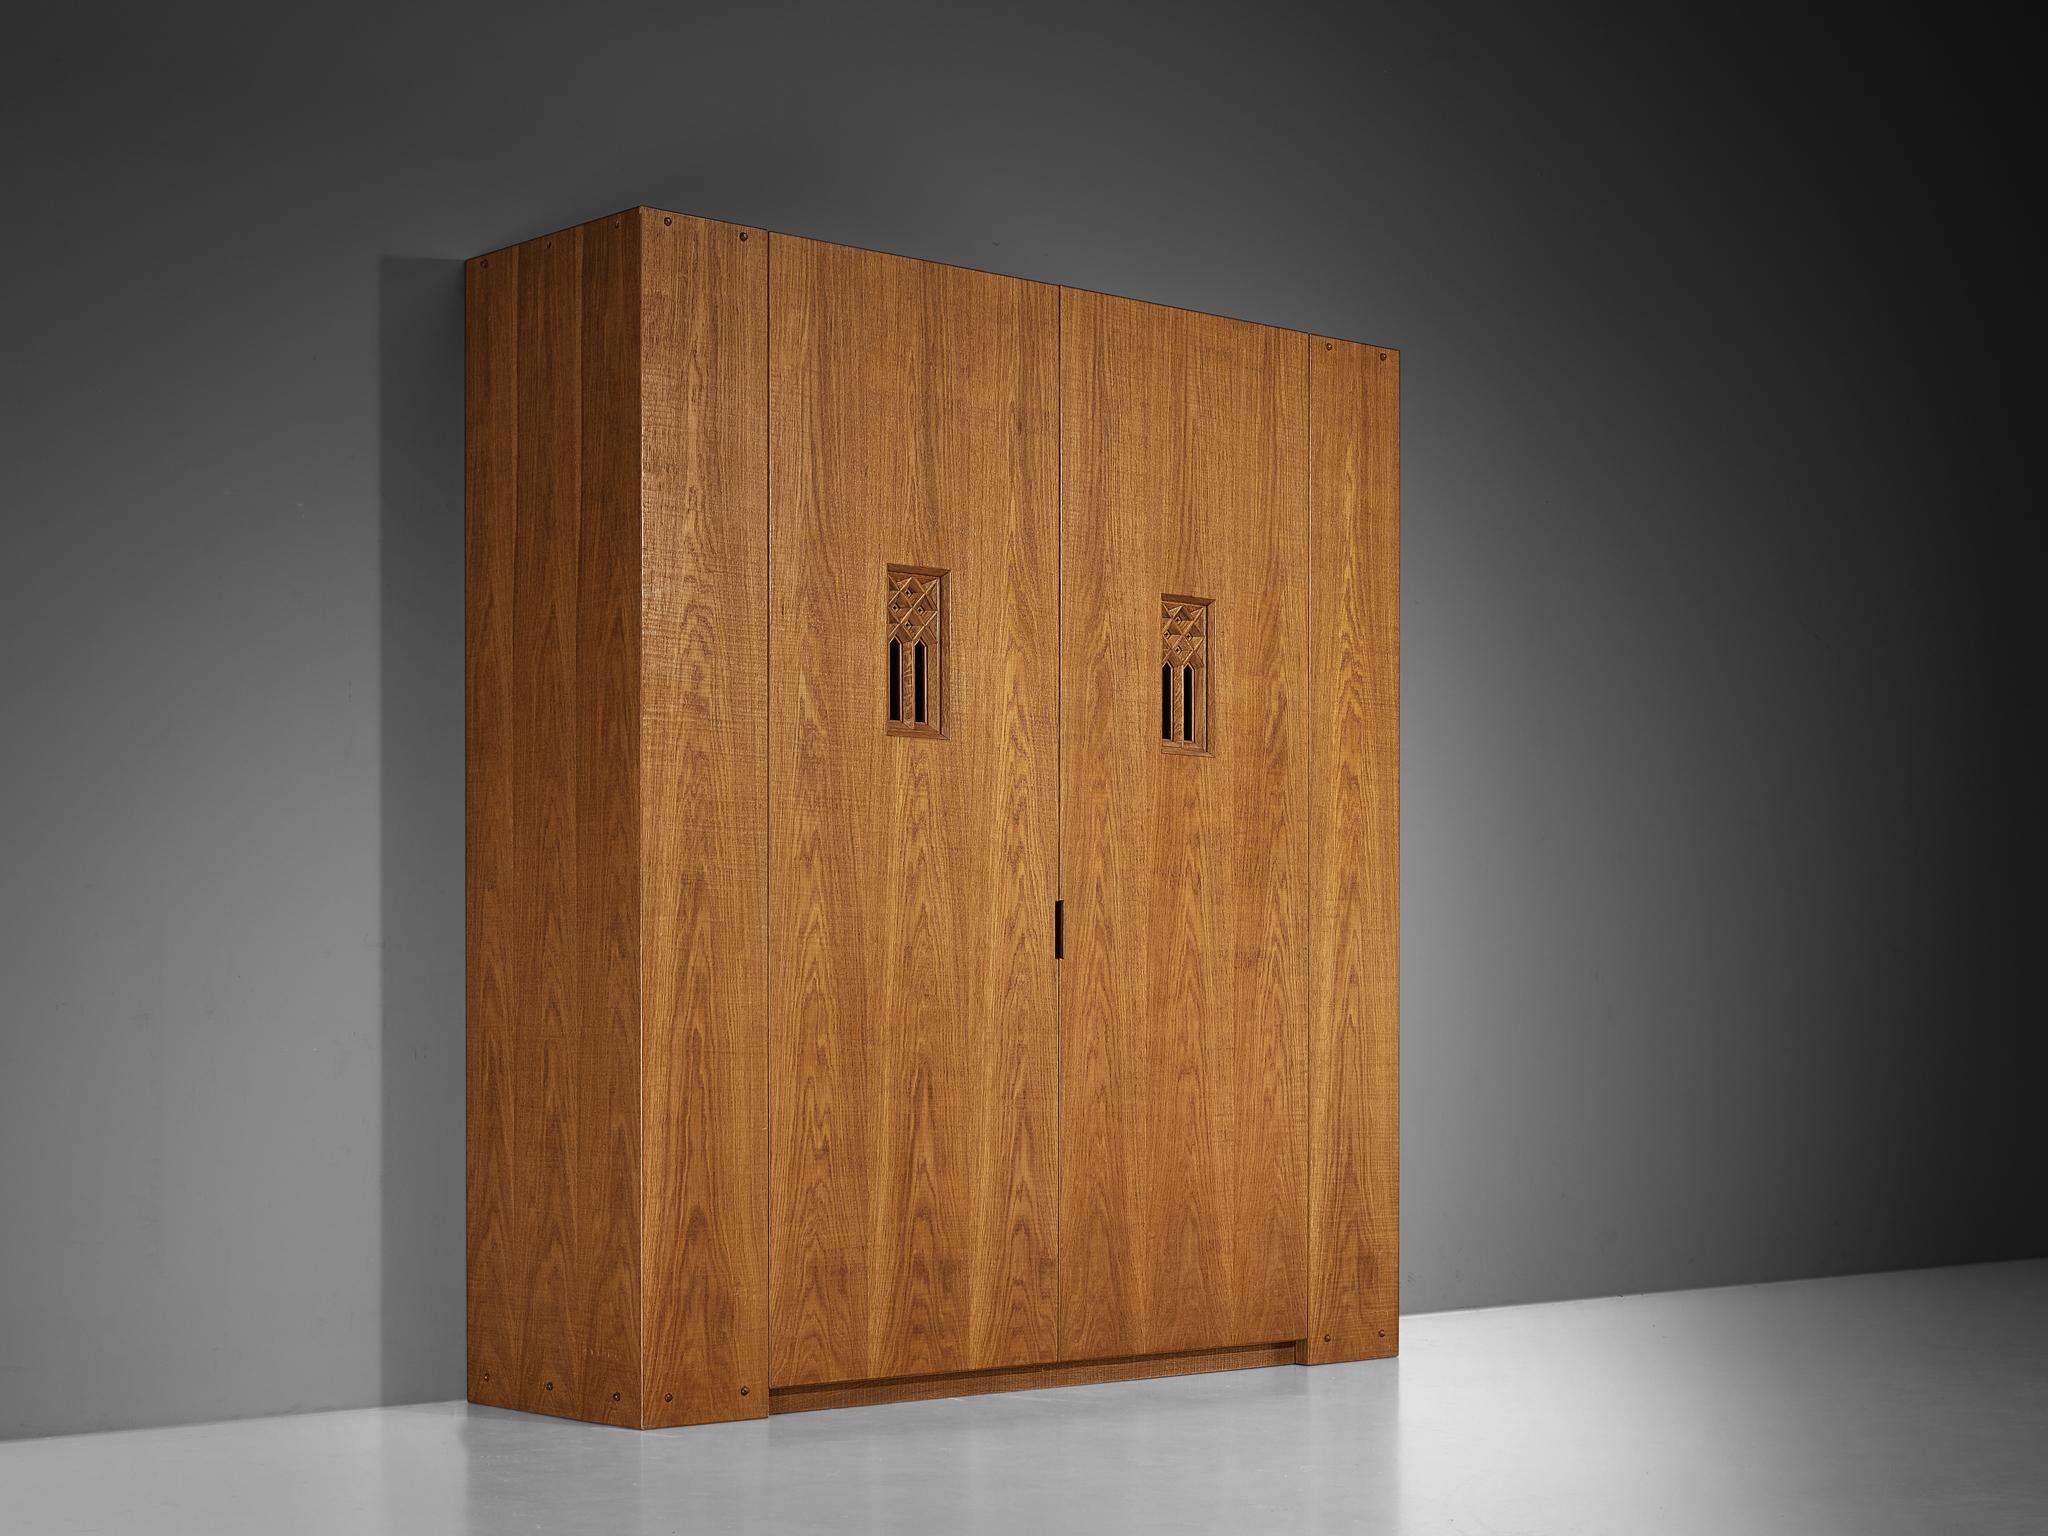 Giuseppe Rivadossi, wardrobe, oak, glass, Italy, 1970s 

An extraordinary grand armoire by Italian sculptor and designer Giuseppe Rivadossi, showcasing exquisite woodworking skills. A standout feature is the pair of rectangular carved insets with